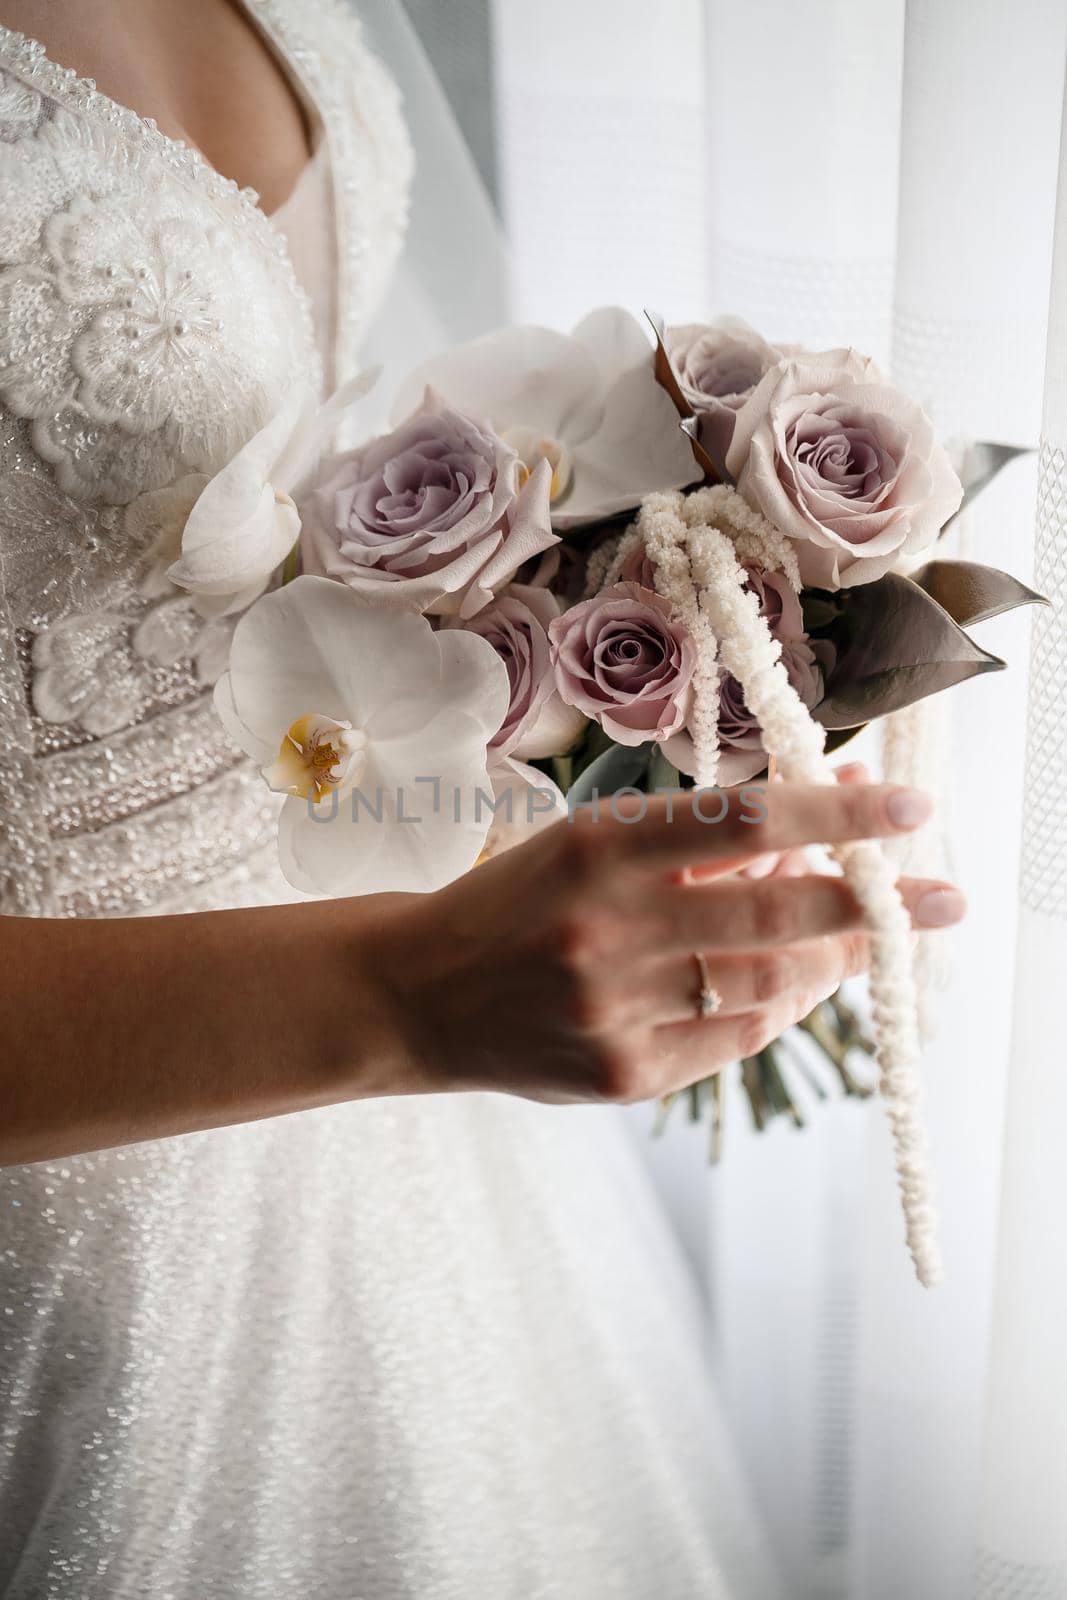 Beautiful bride holding a delicate bouquet of flowers in her hands on a wedding day by Dmitrytph